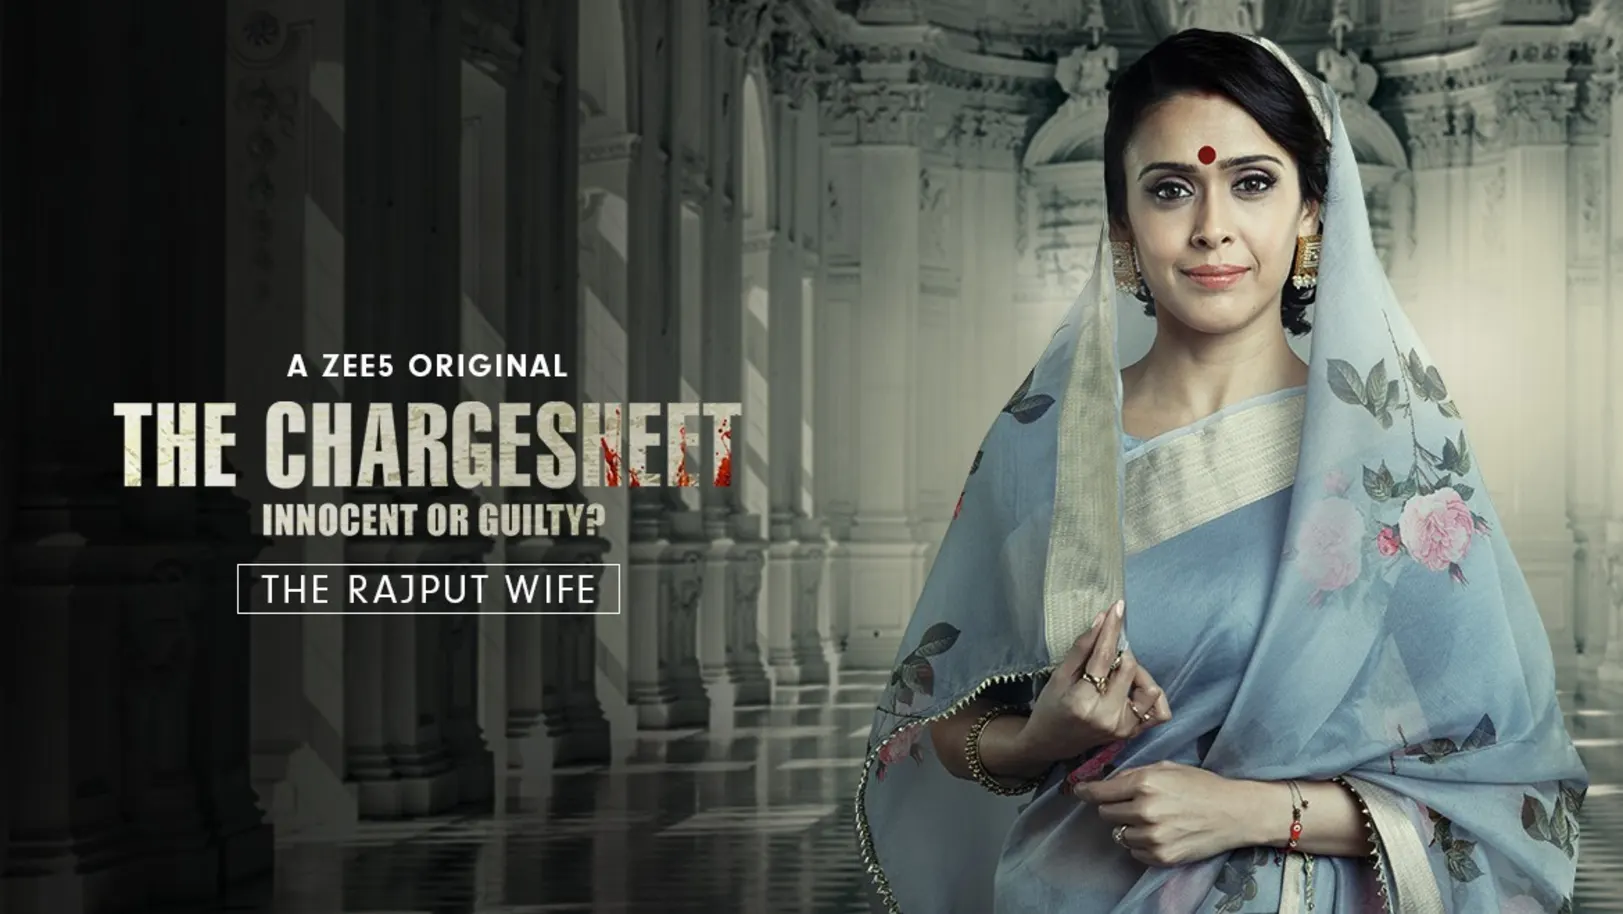 The Rajput Wife | The Chargesheet: Innocent or Guilty? | Promo